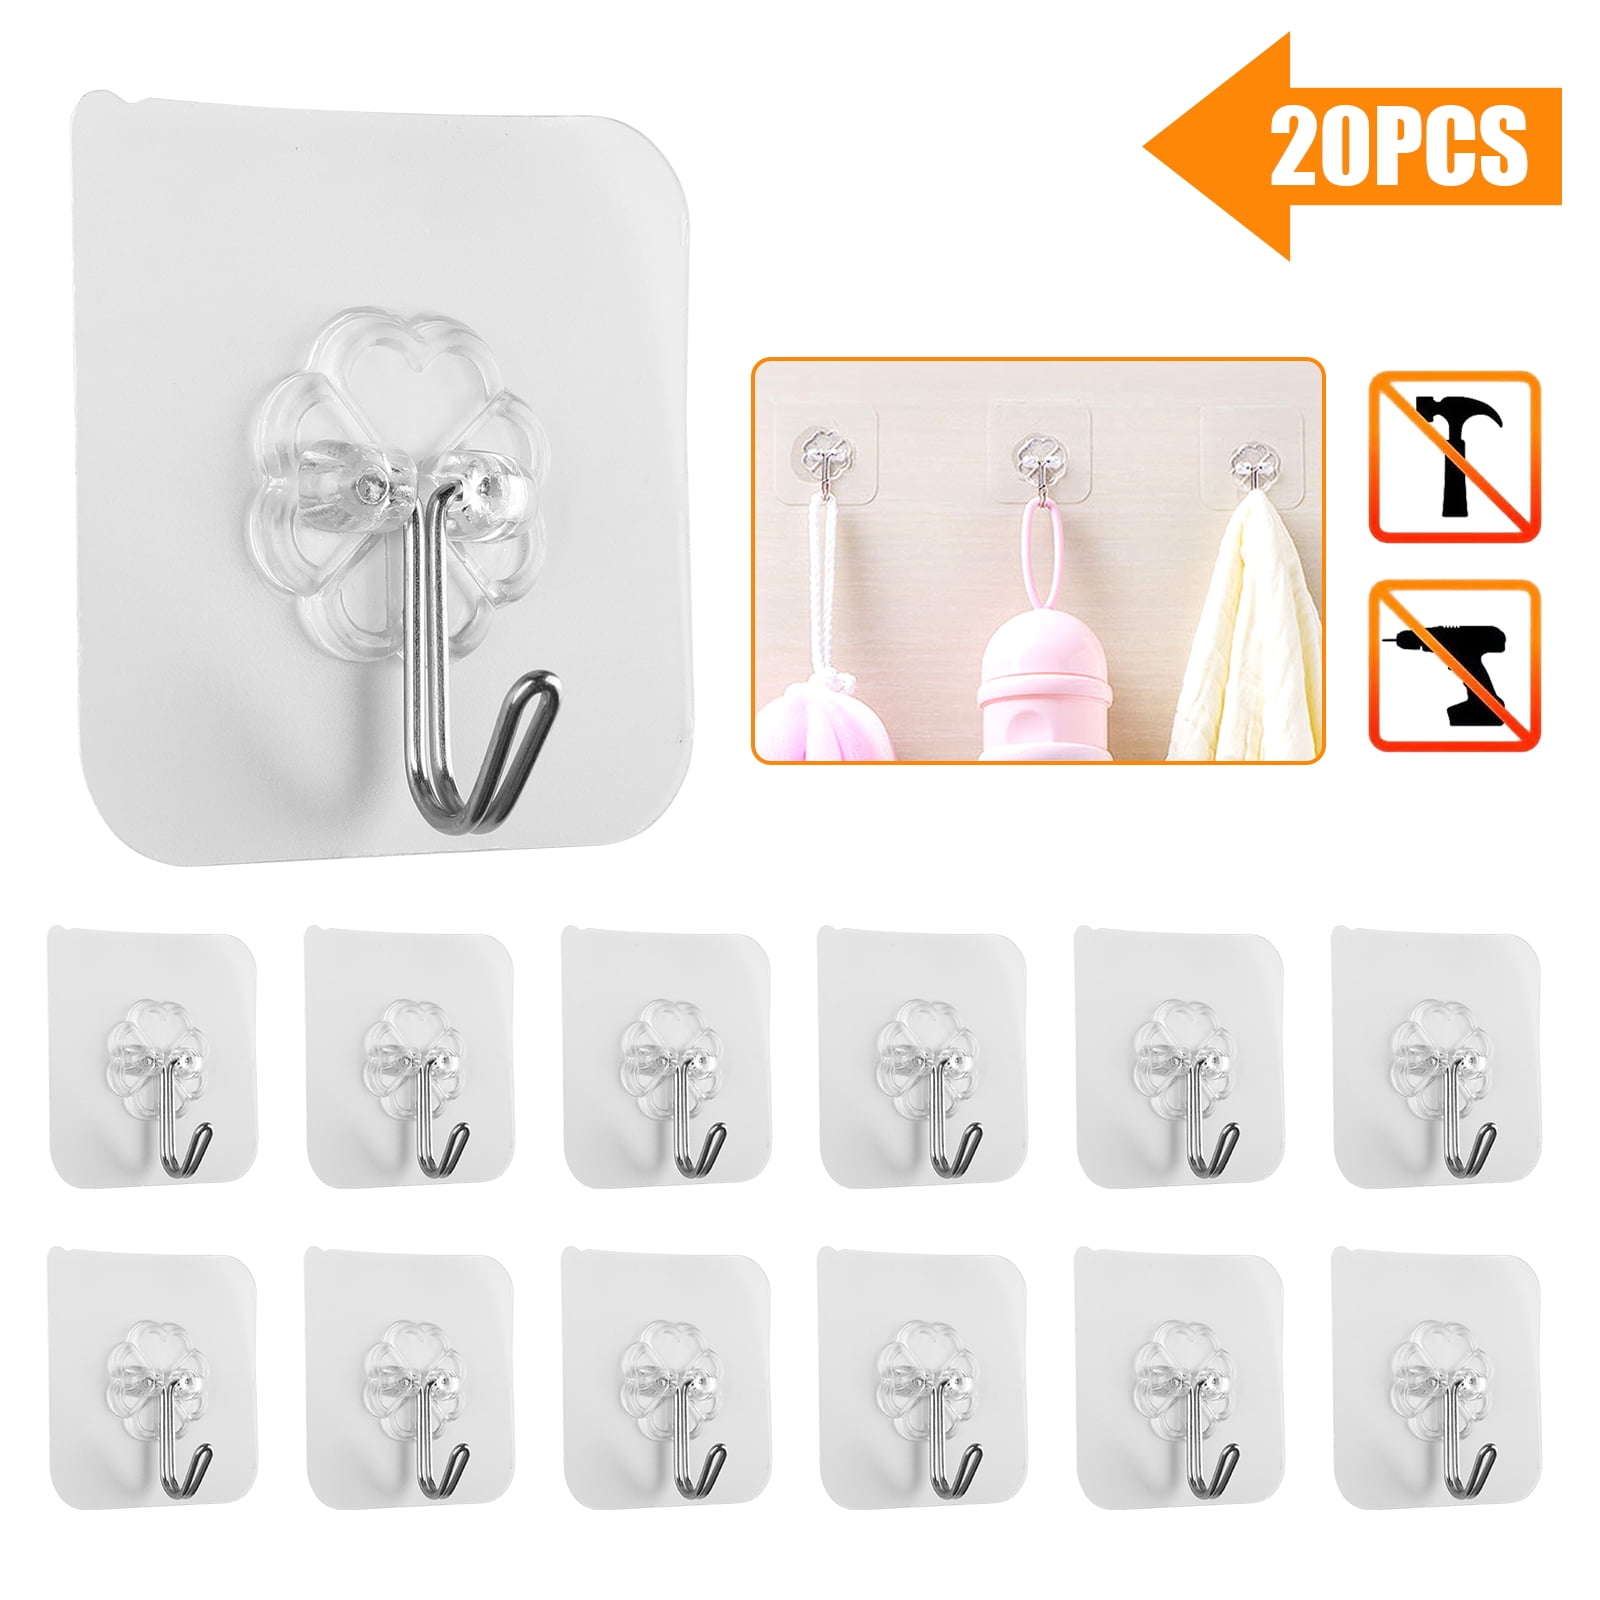 1-30x Removable Self Adhesive Wall-Sticky Hook Holder Heavy Duty Nail Free Clear 